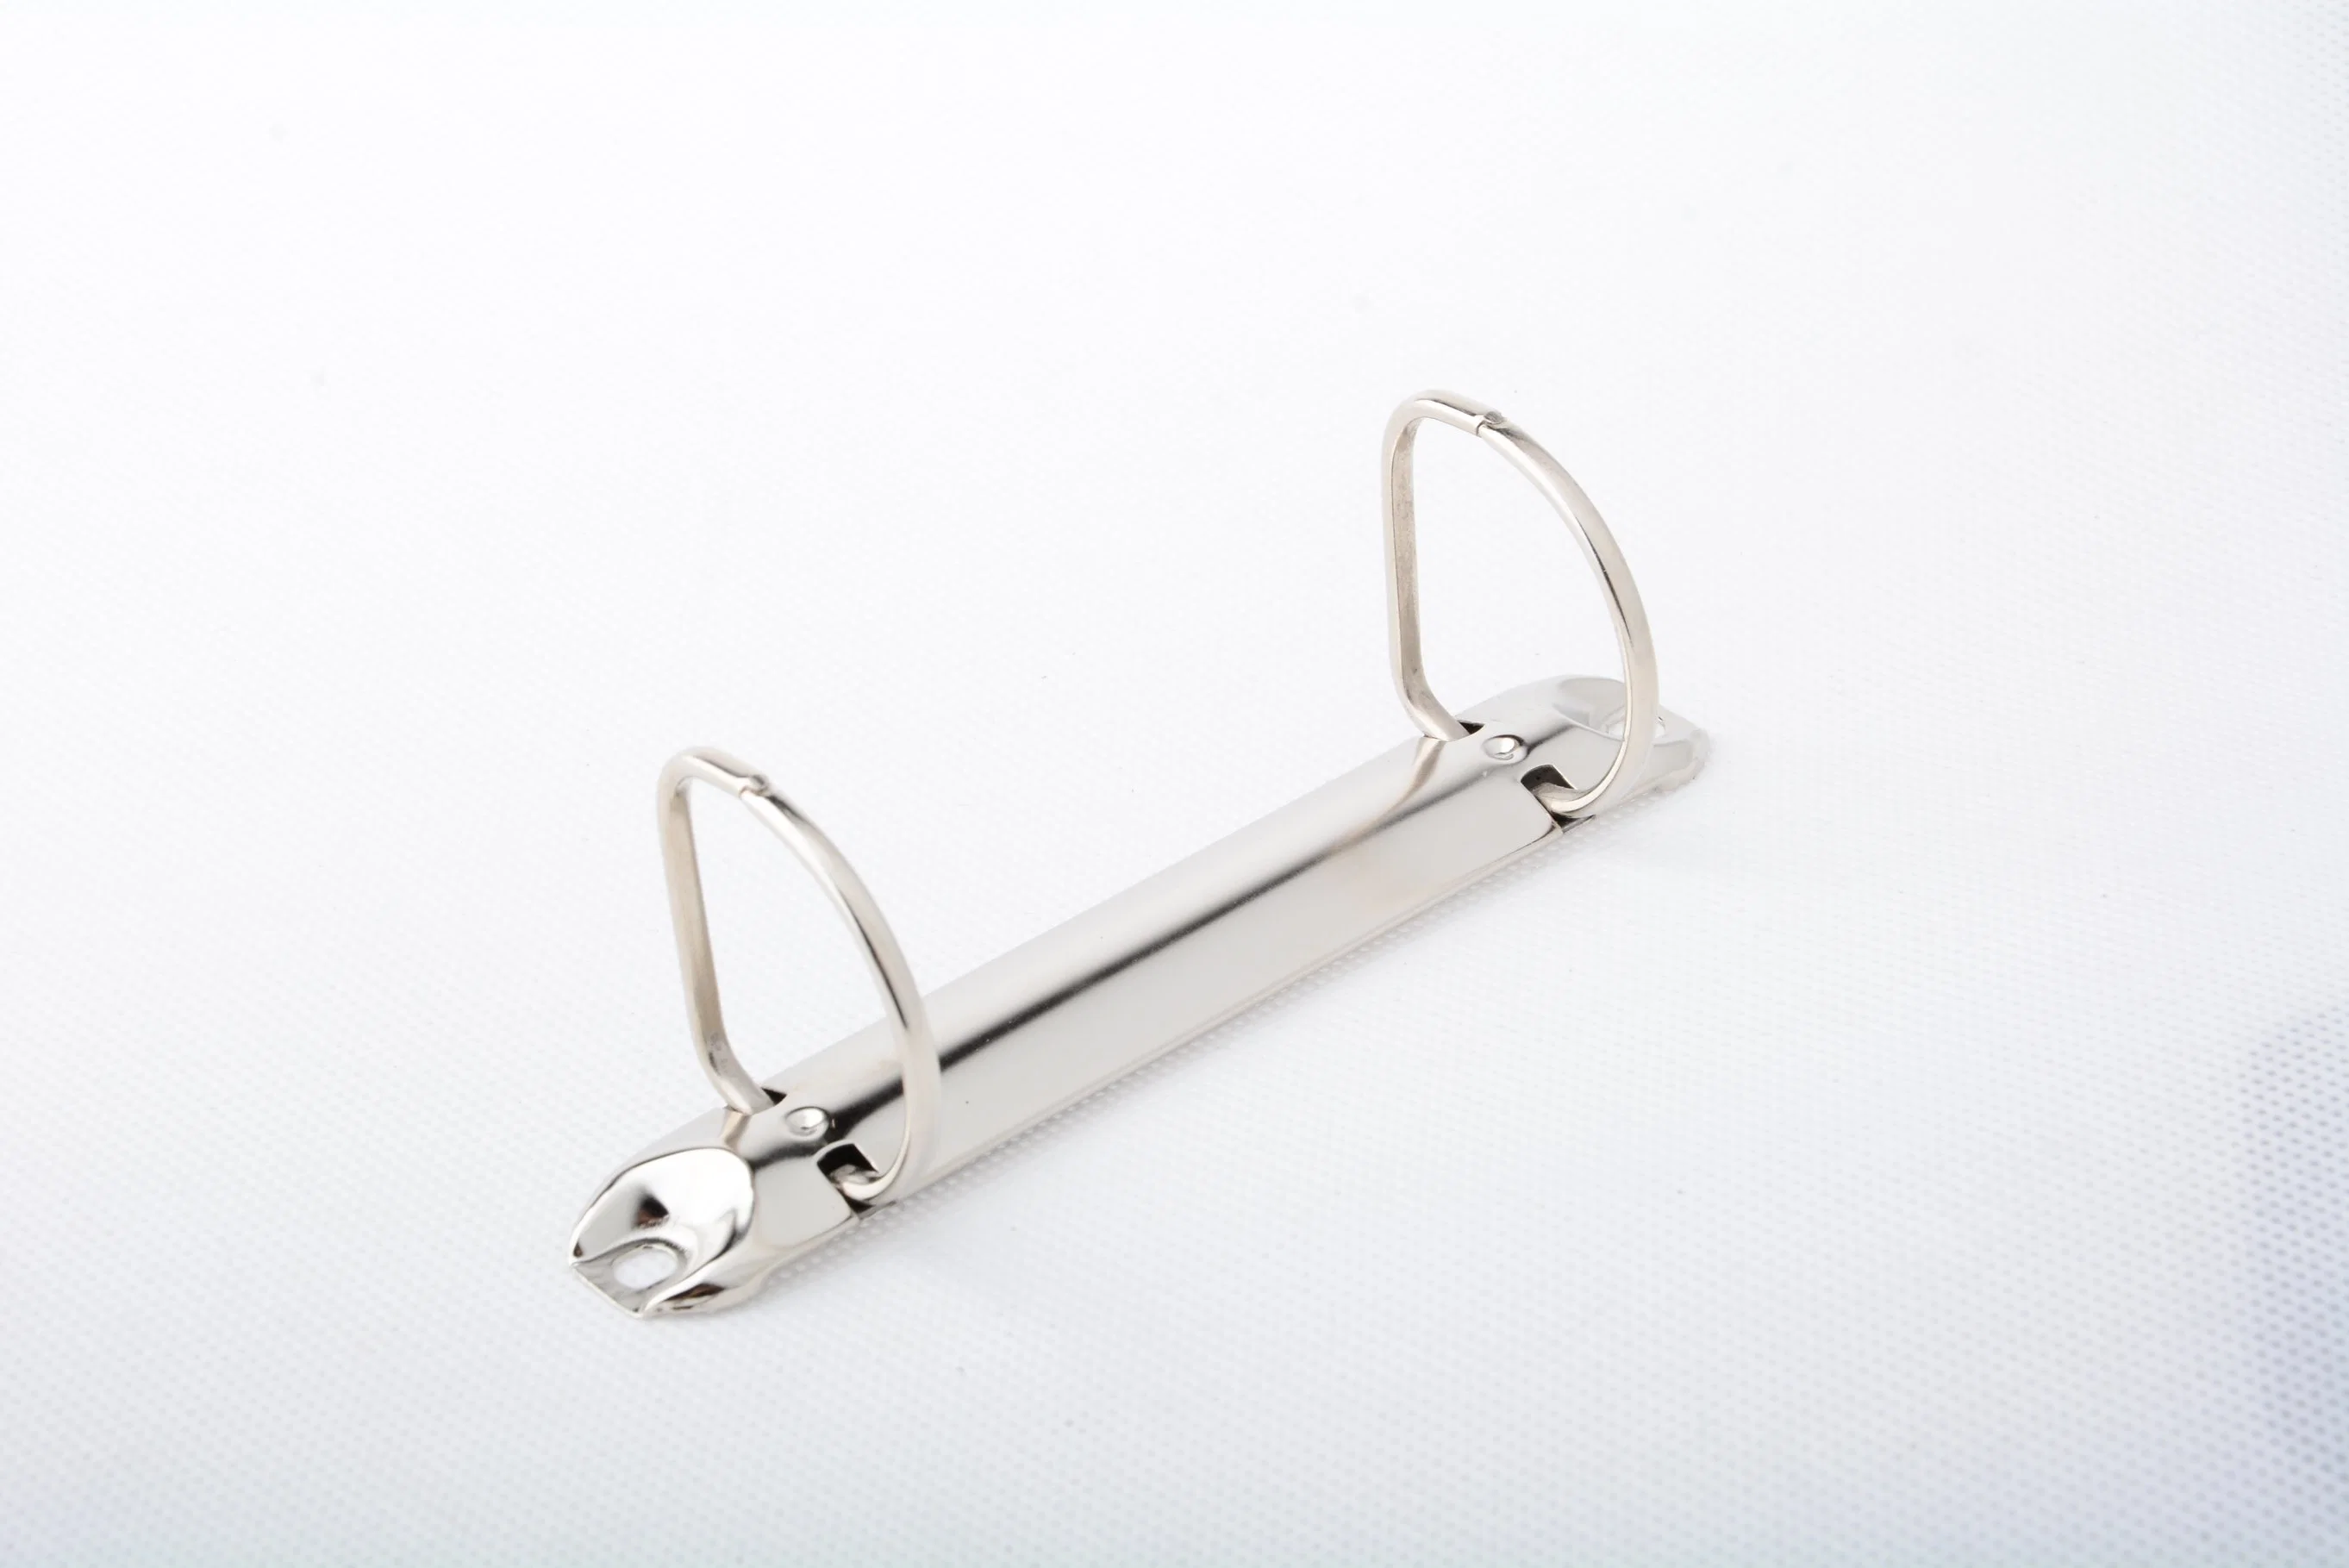 2 Ring Mechanism for Notebook Best Selling 2 Ring Binder Clip in Market